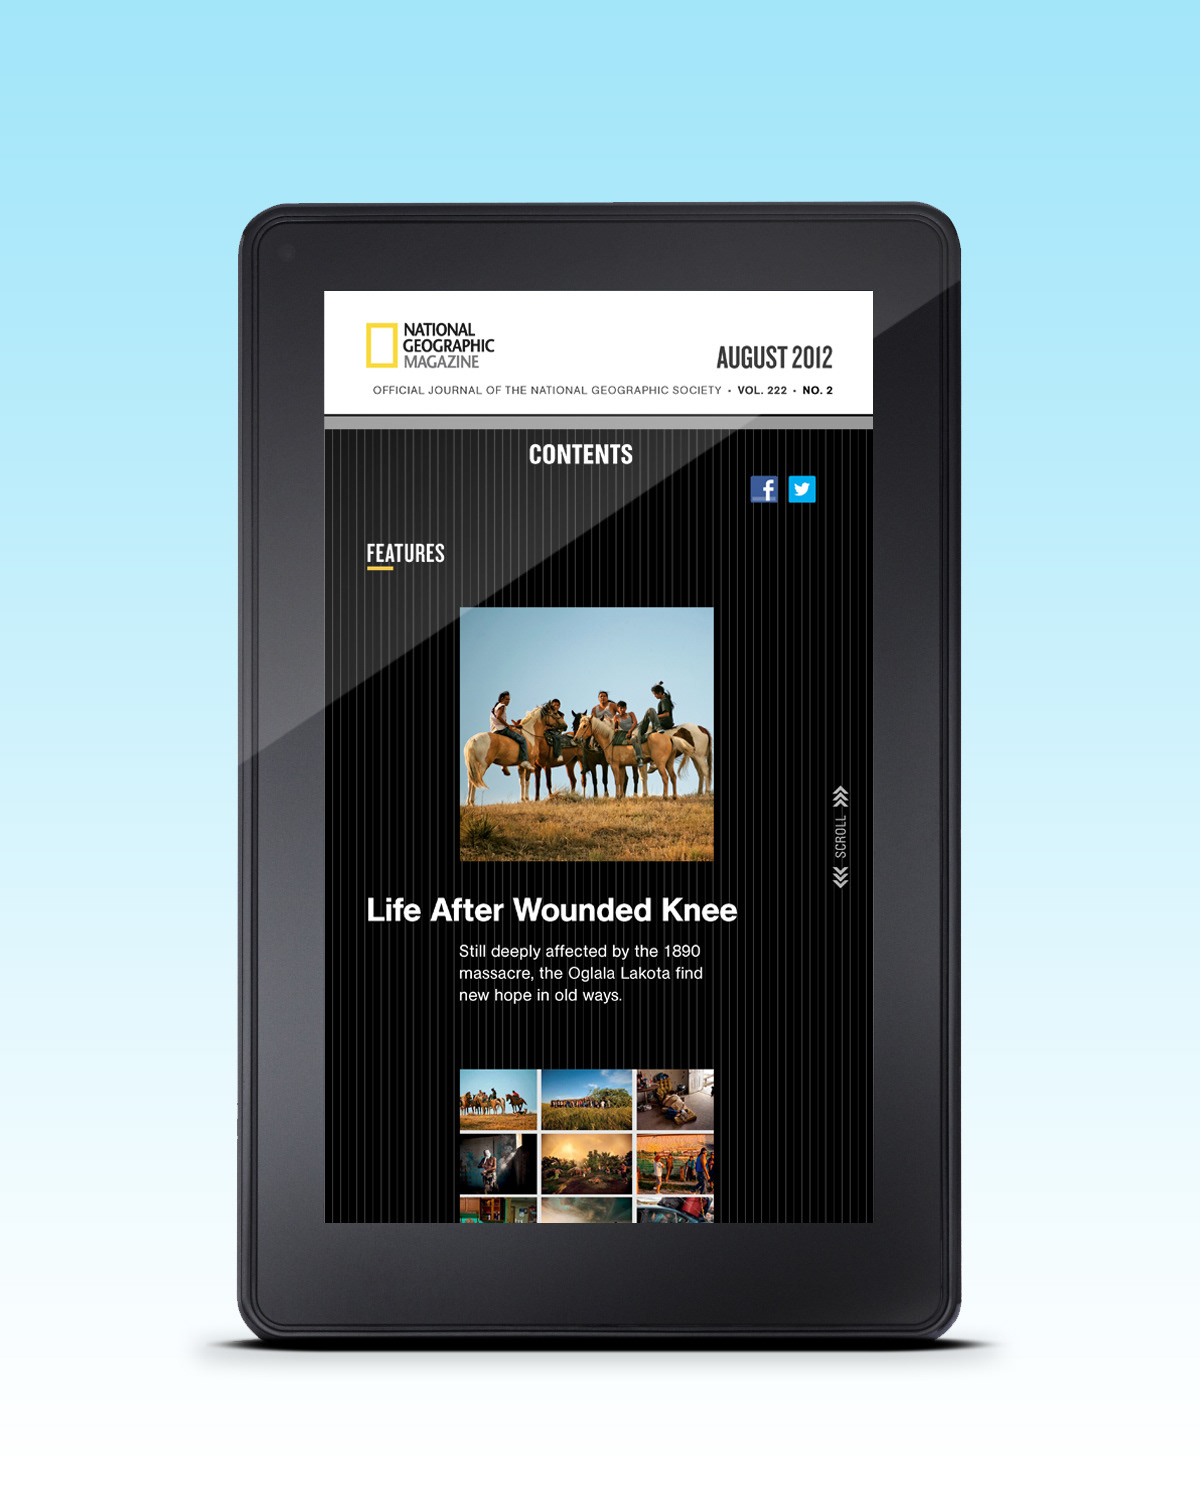 national geographic kindle fire DPS digital publishing suite cs6 liquid layout Adobe DPS